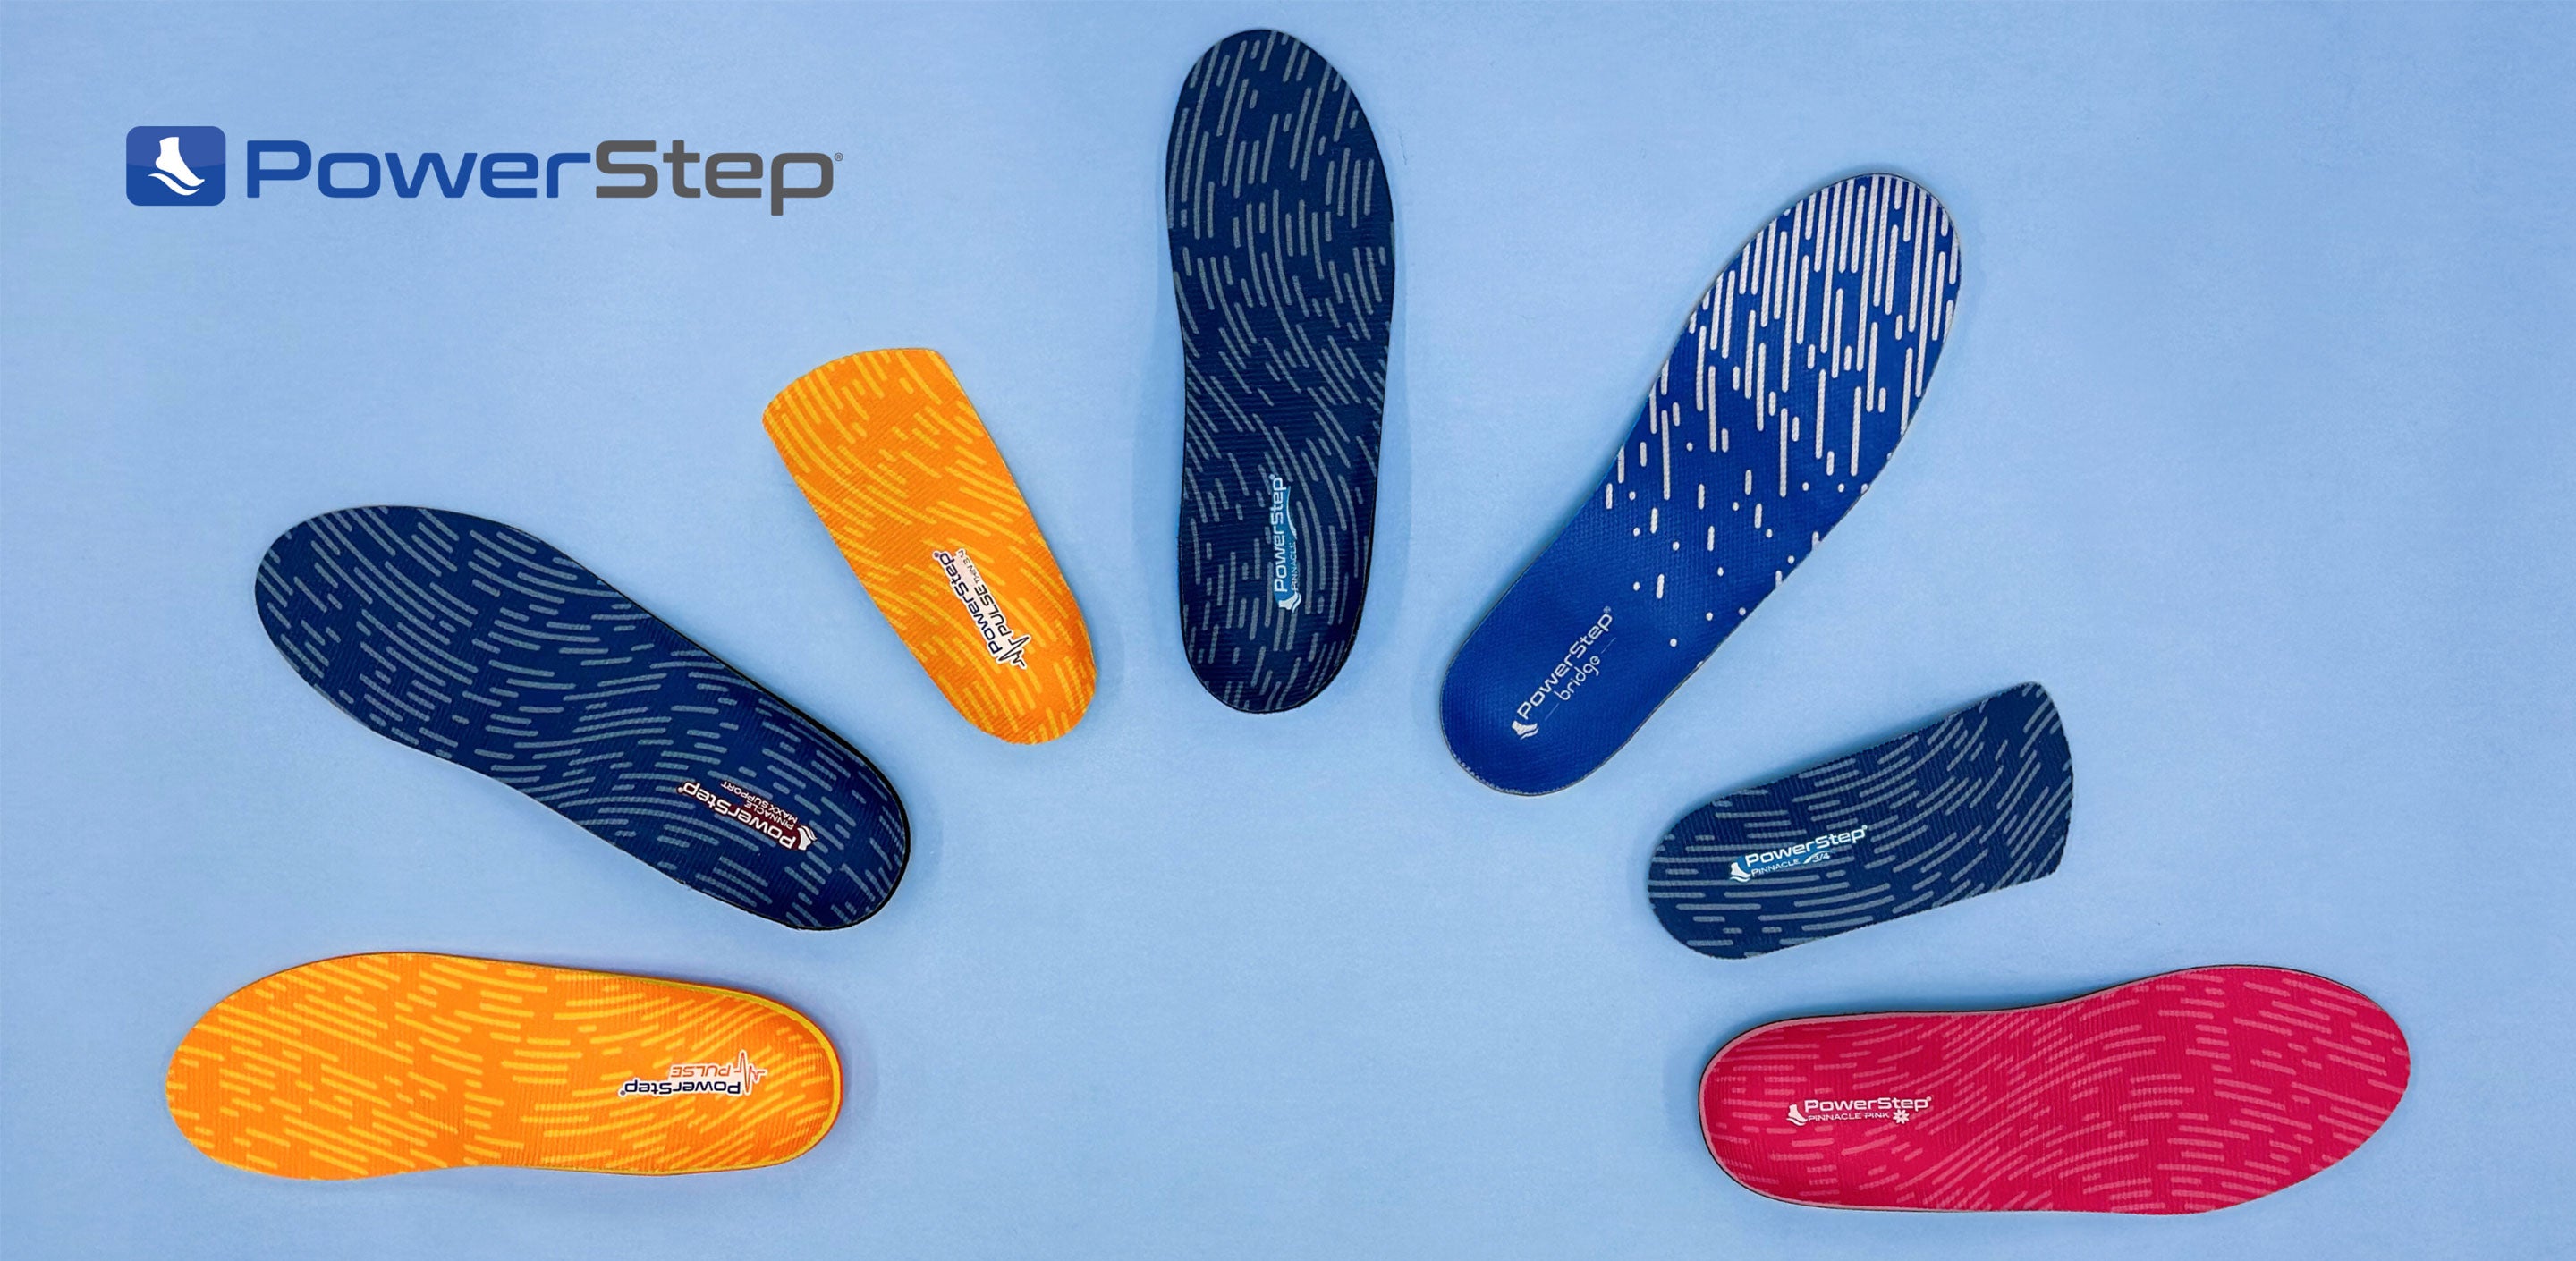 How to Choose the Right Orthotic Insoles for You by PowerStep